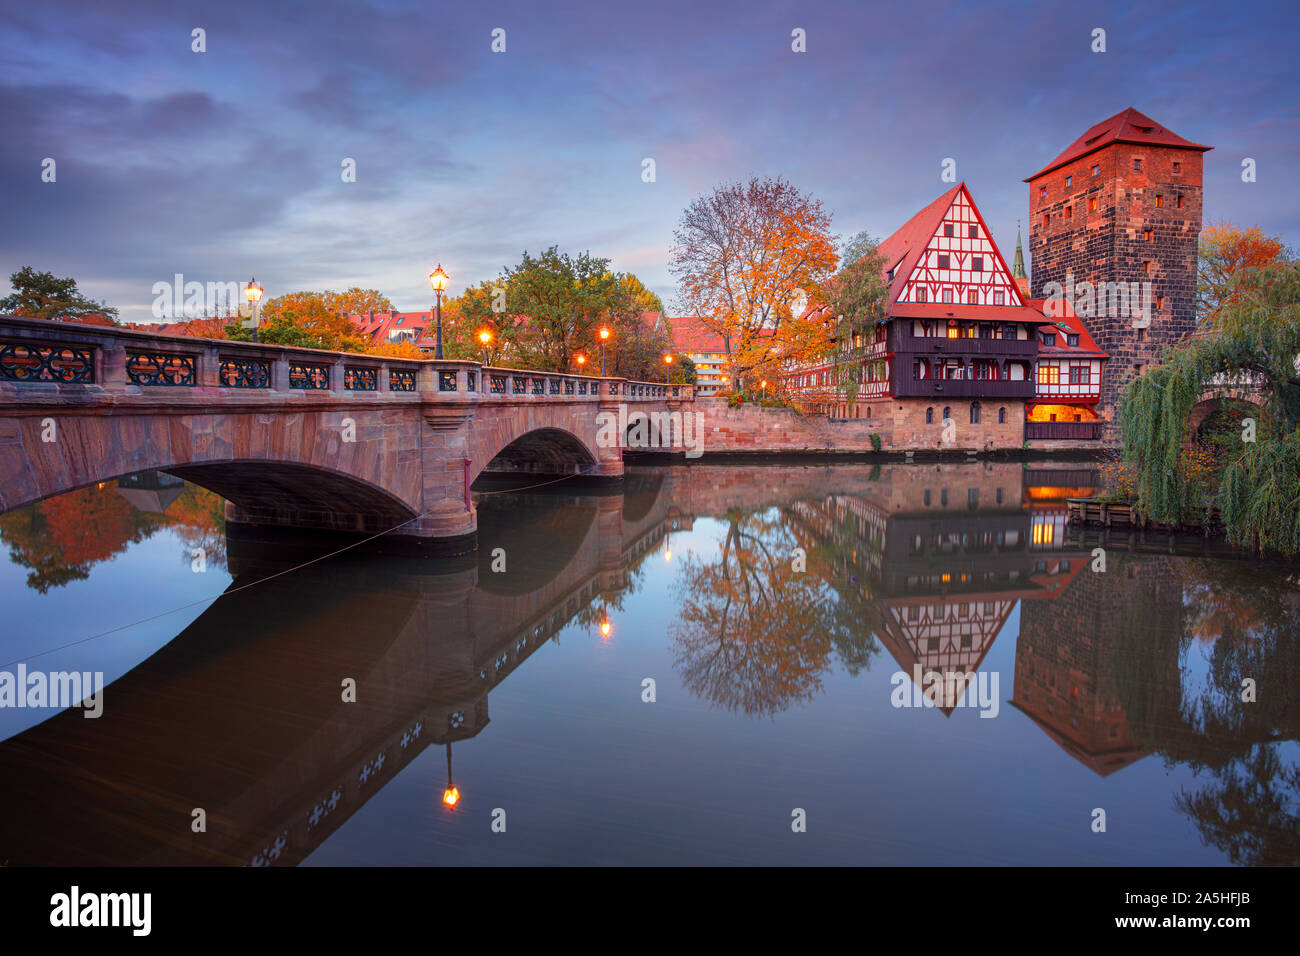 Nuremberg, Germany. Cityscape image of old town Nuremberg, Germany during autumn sunset. Stock Photo